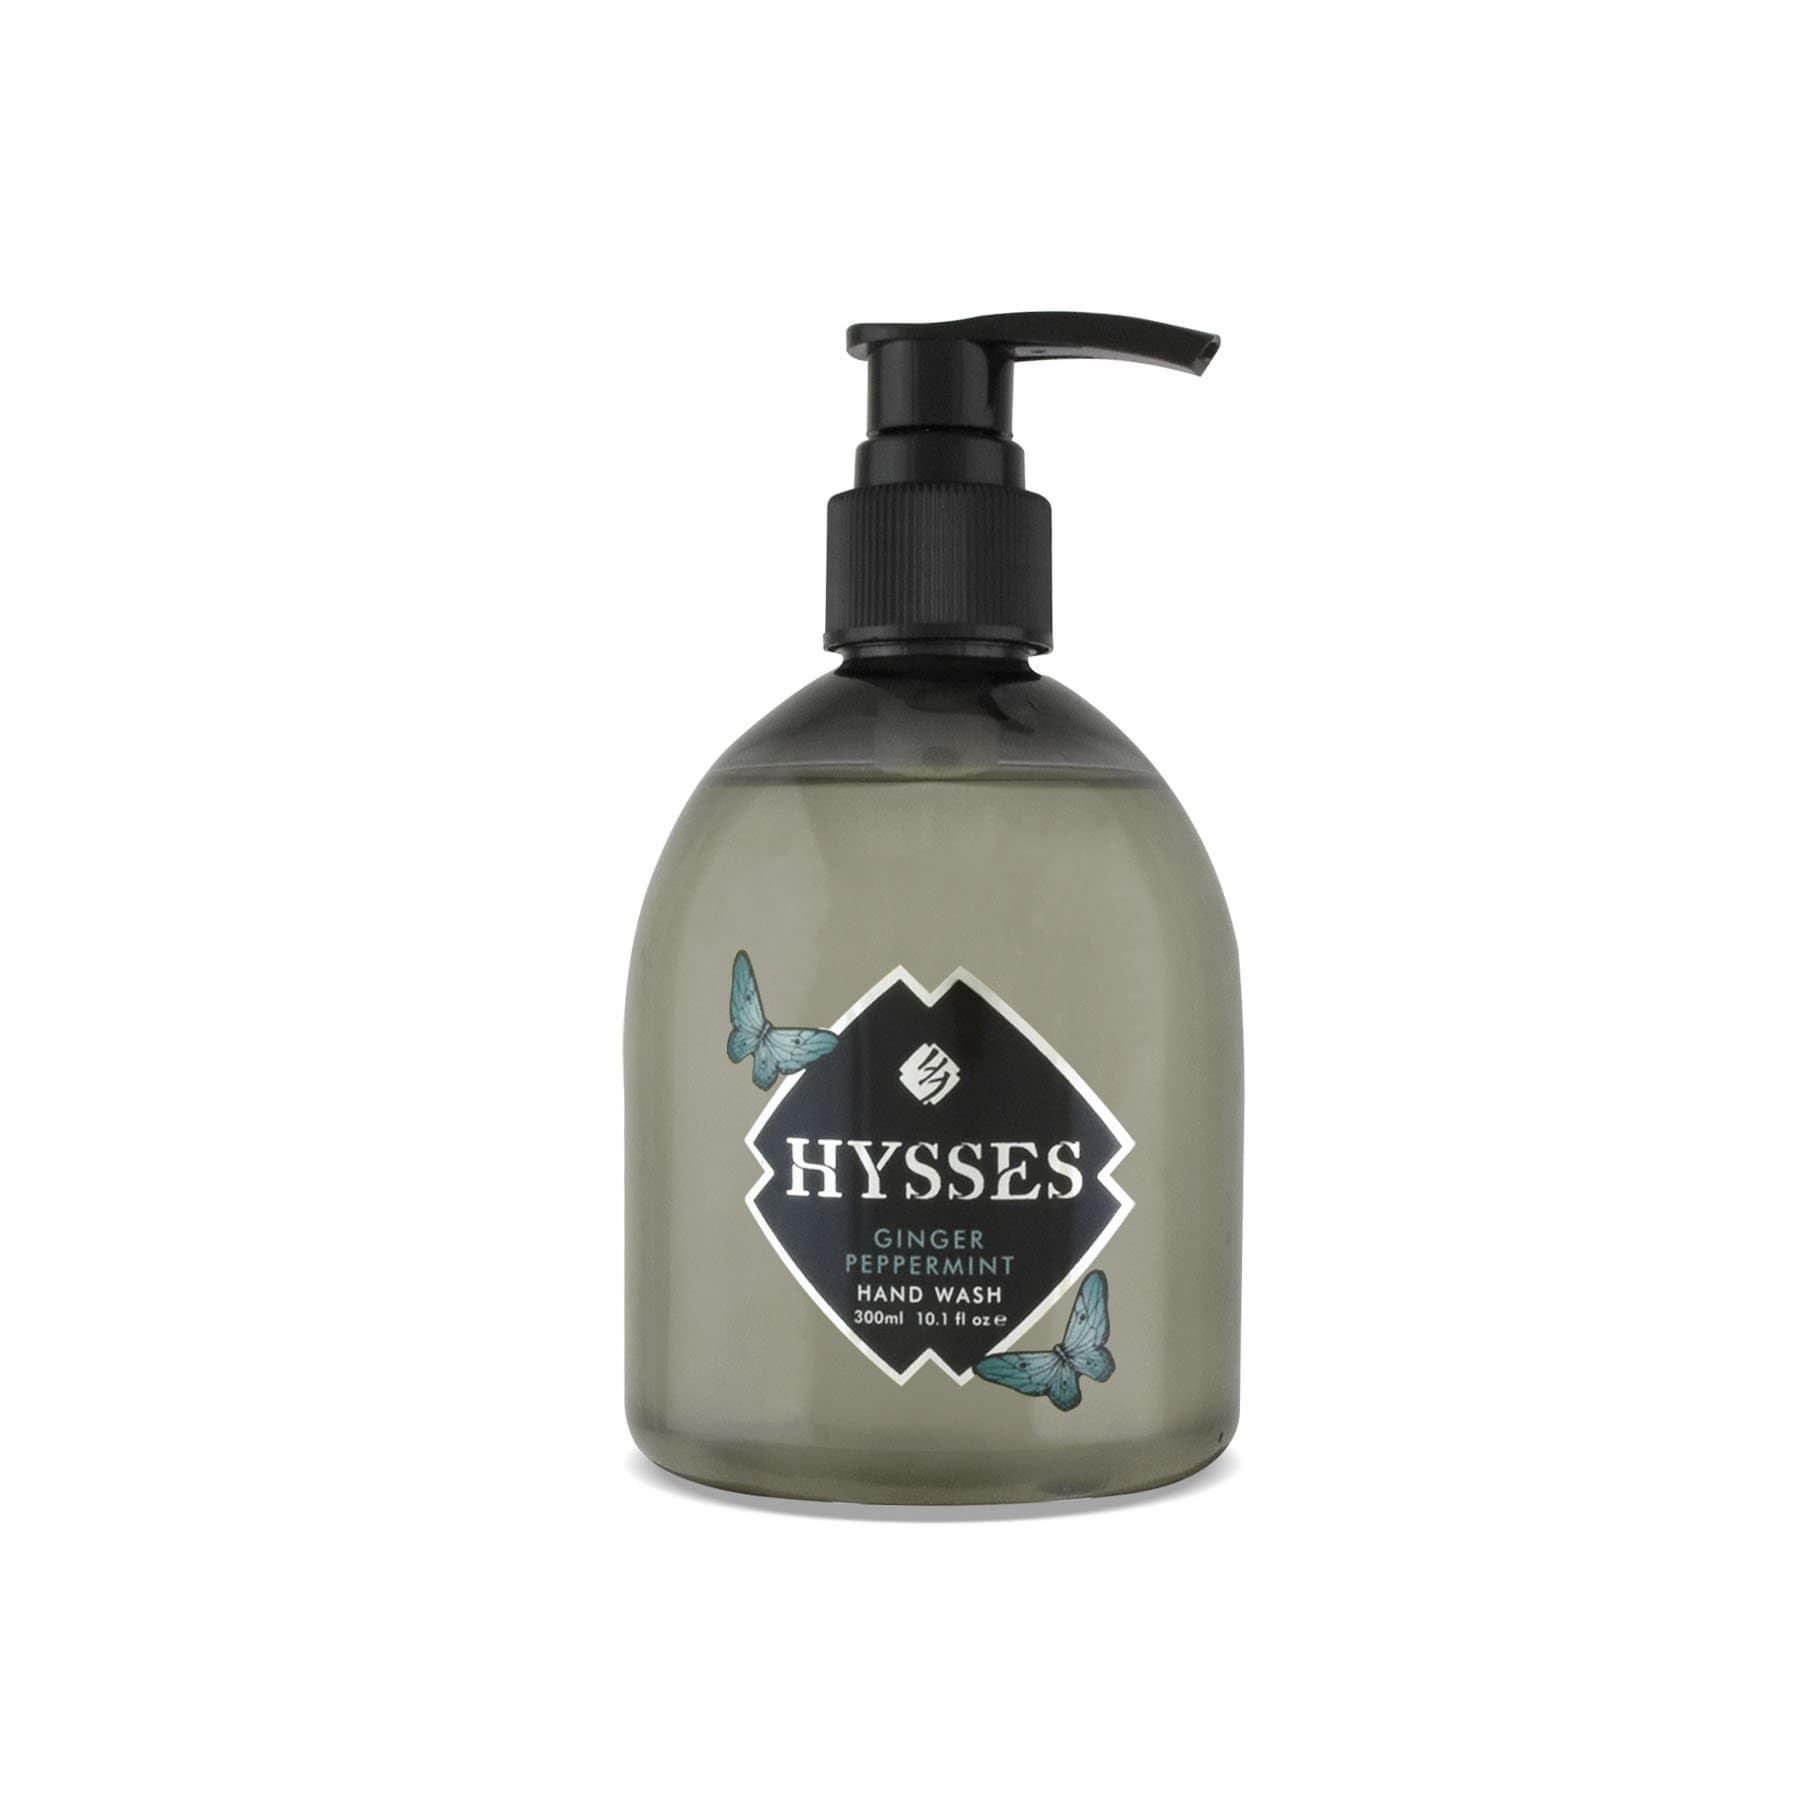 Hysses Body Care Hand Wash Ginger Peppermint